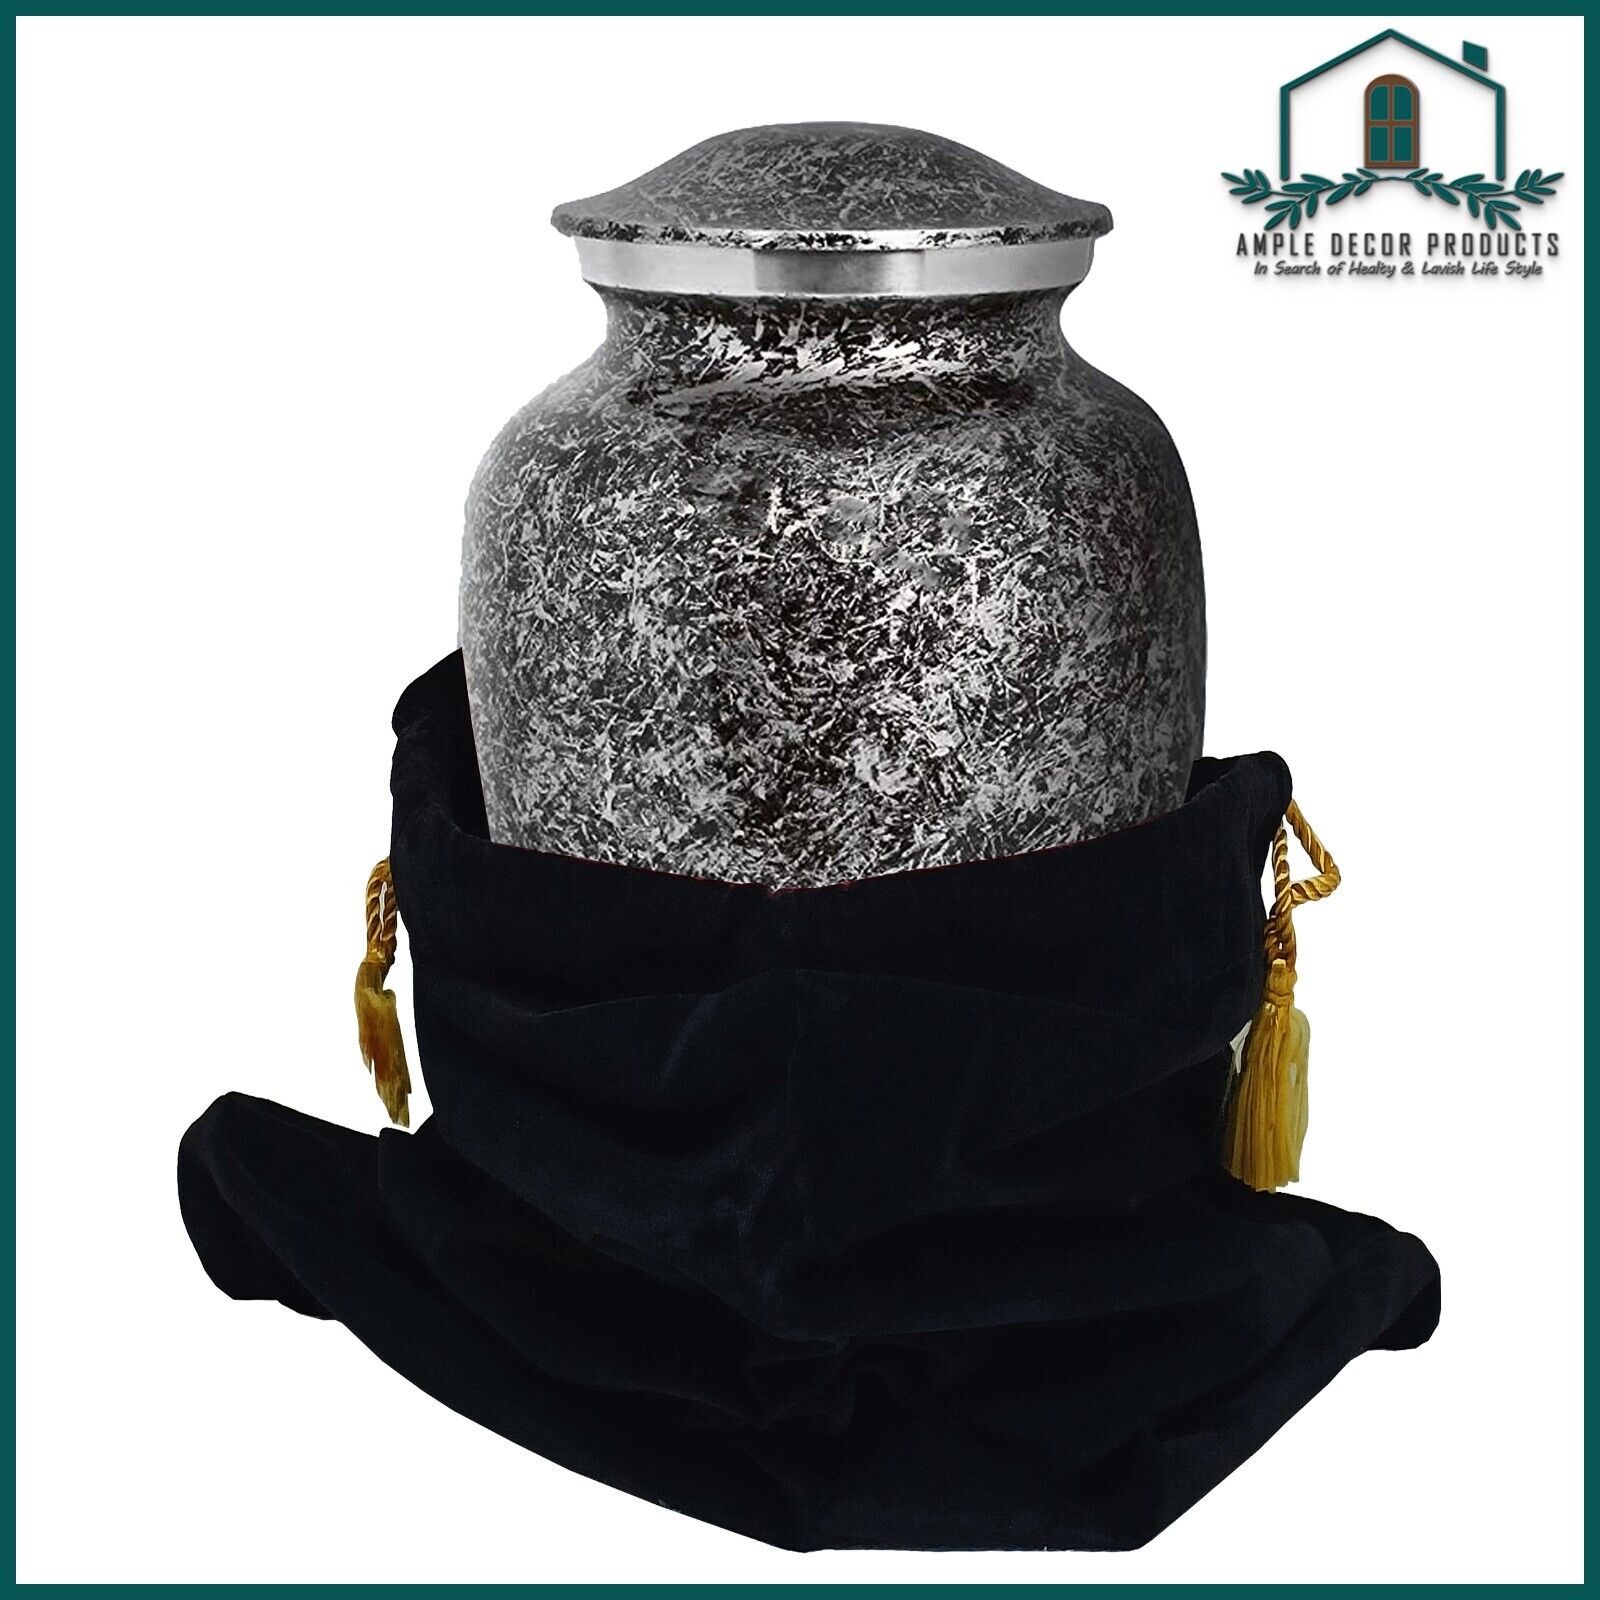 Artistic Cremation Urns for Human Ashes - Unique Keepsake Grey Urn With Bag